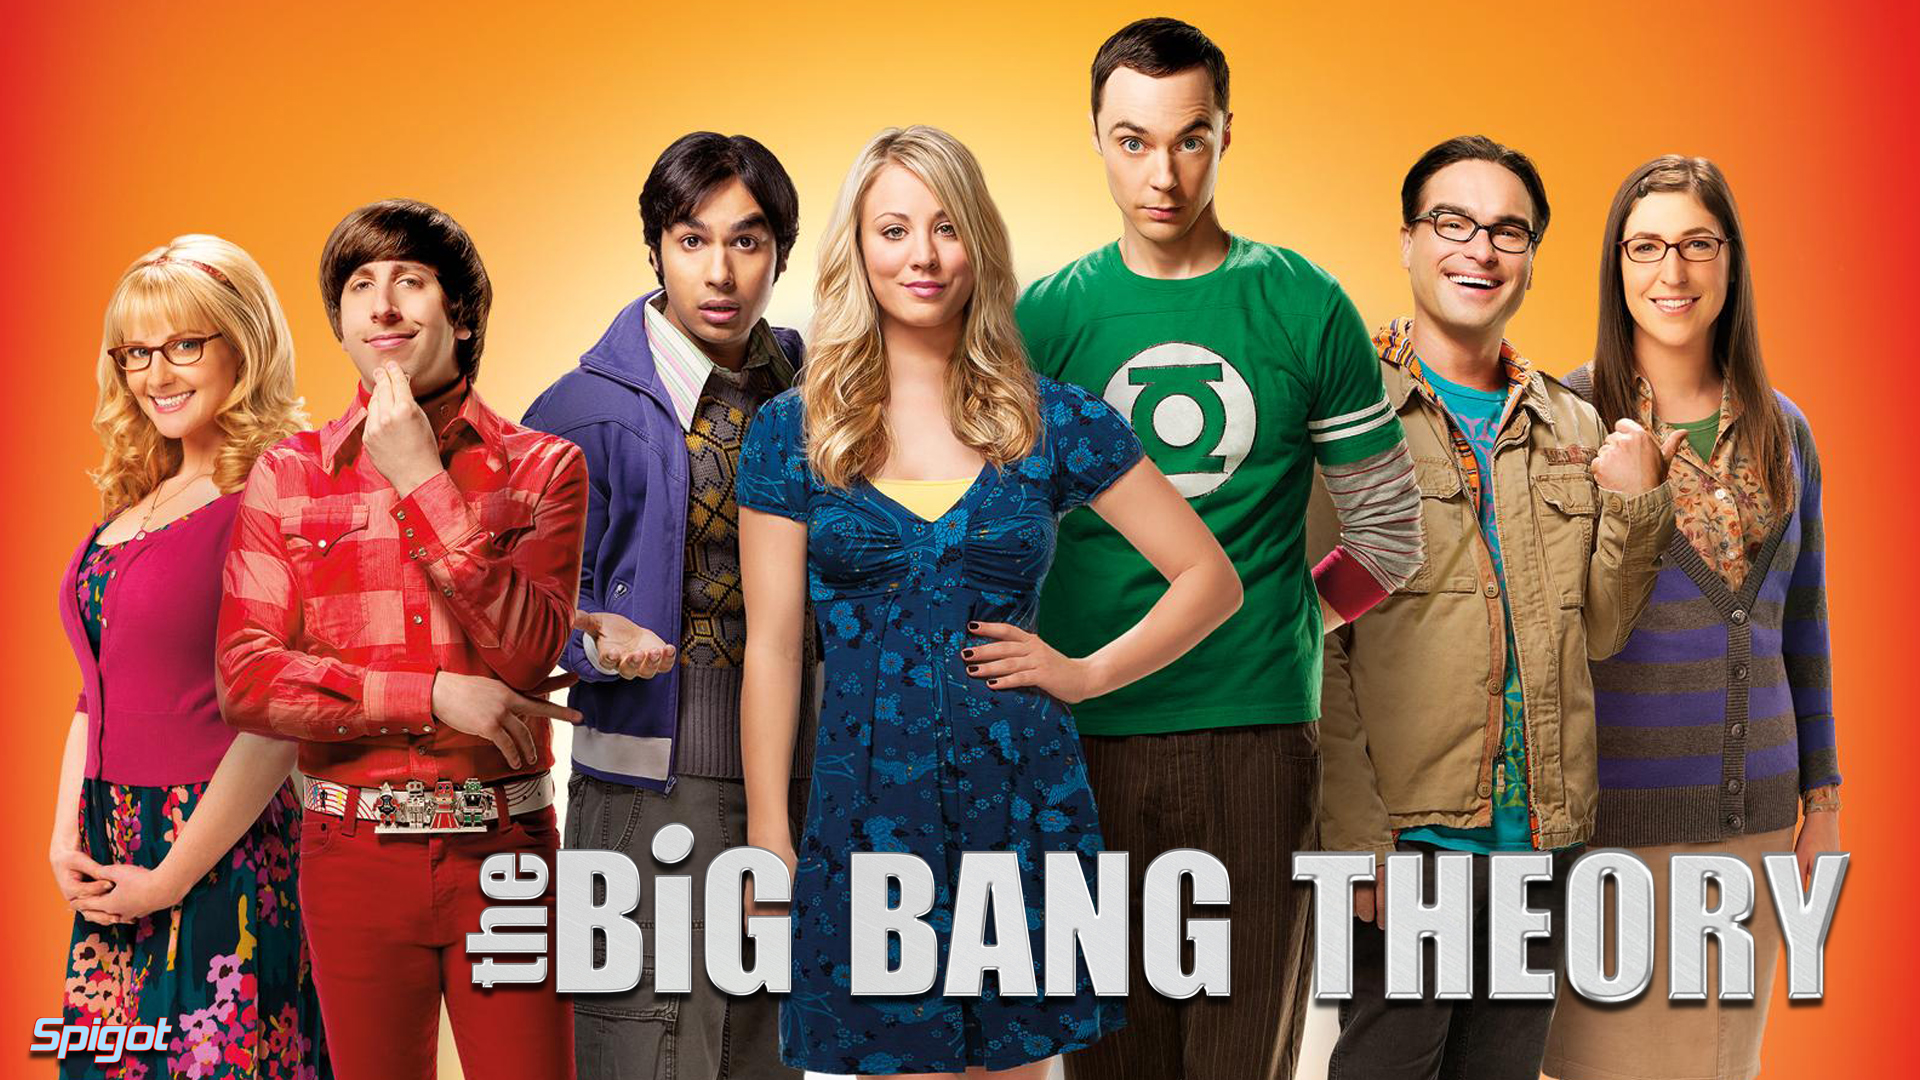 Amazing The Big Bang Theory Pictures & Backgrounds